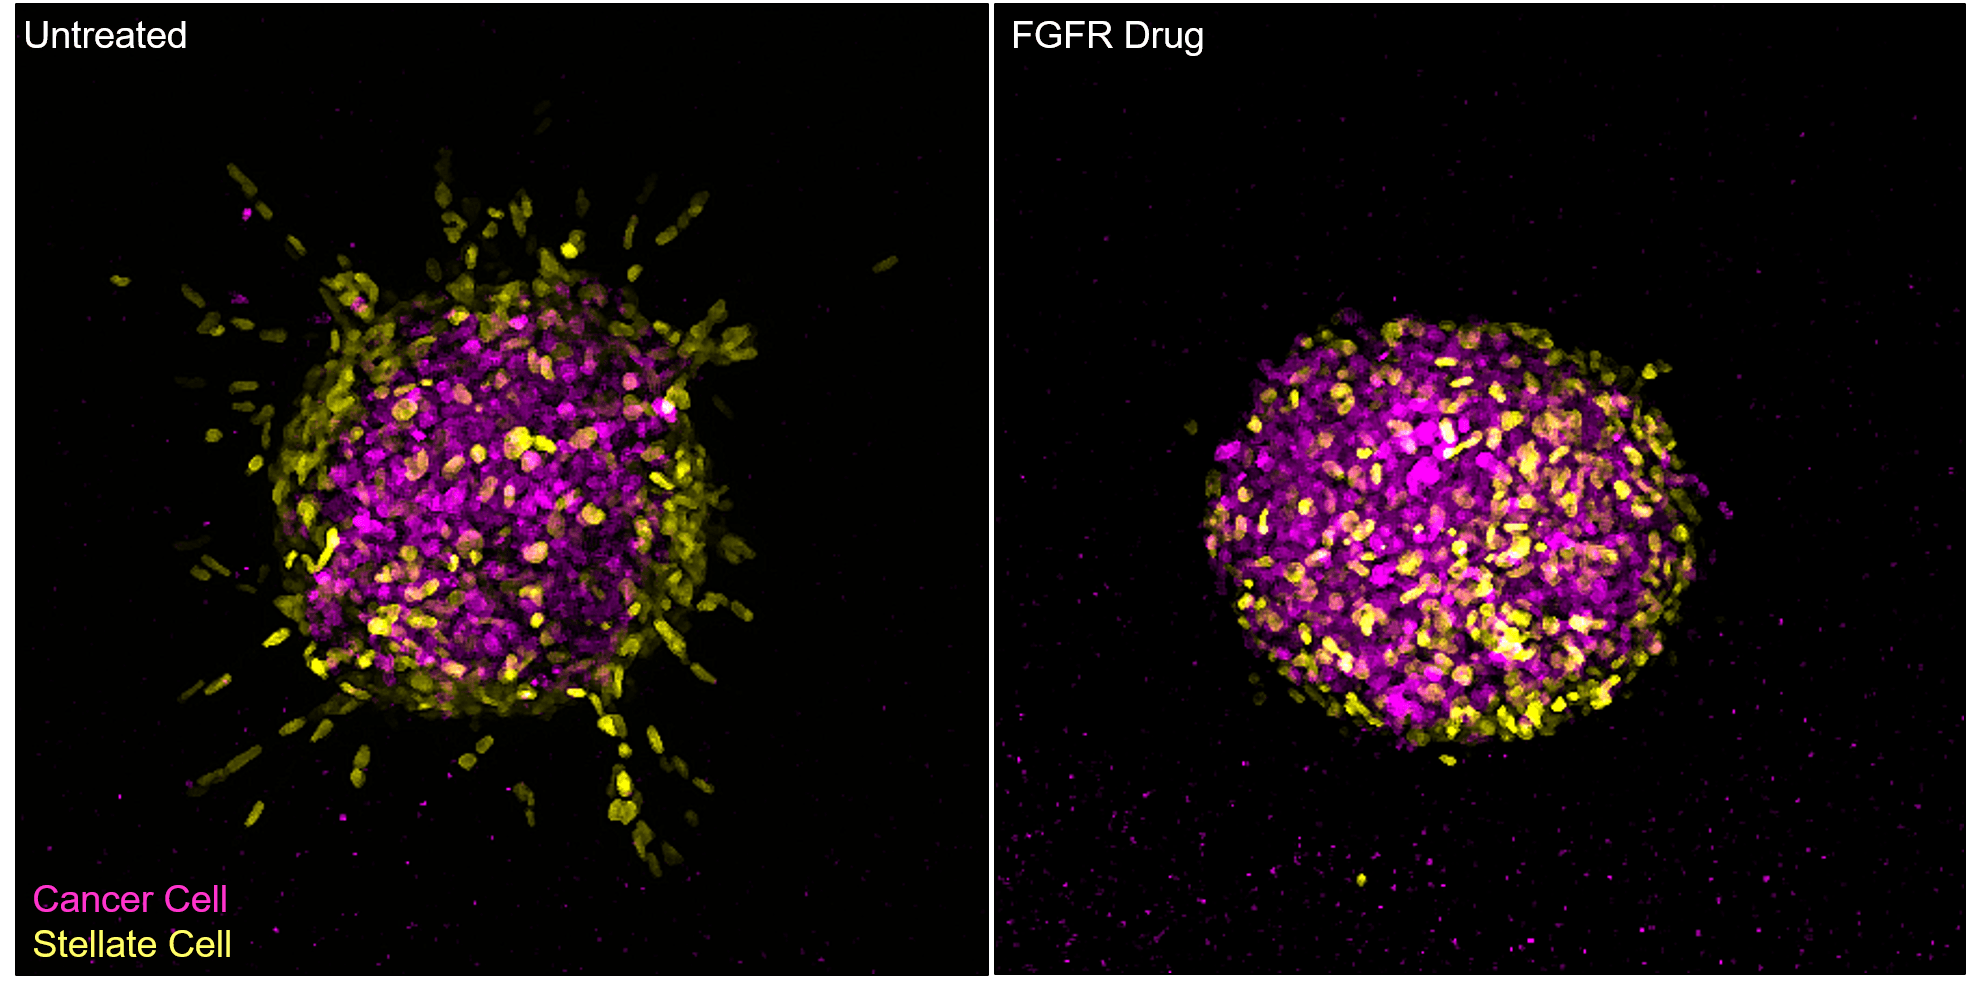 3D spheres of cancer cells (shown in purple) and stellate cells (shown in yellow). In untreated conditions (shown in the left panel of the image), stellate cells invade into the surrounding tissue, creating tracks for the cancer cells to follow. When treated with an FGFR inhibitor (shown in the right panel), this invasion is blocked and the cells remain in the central sphere.